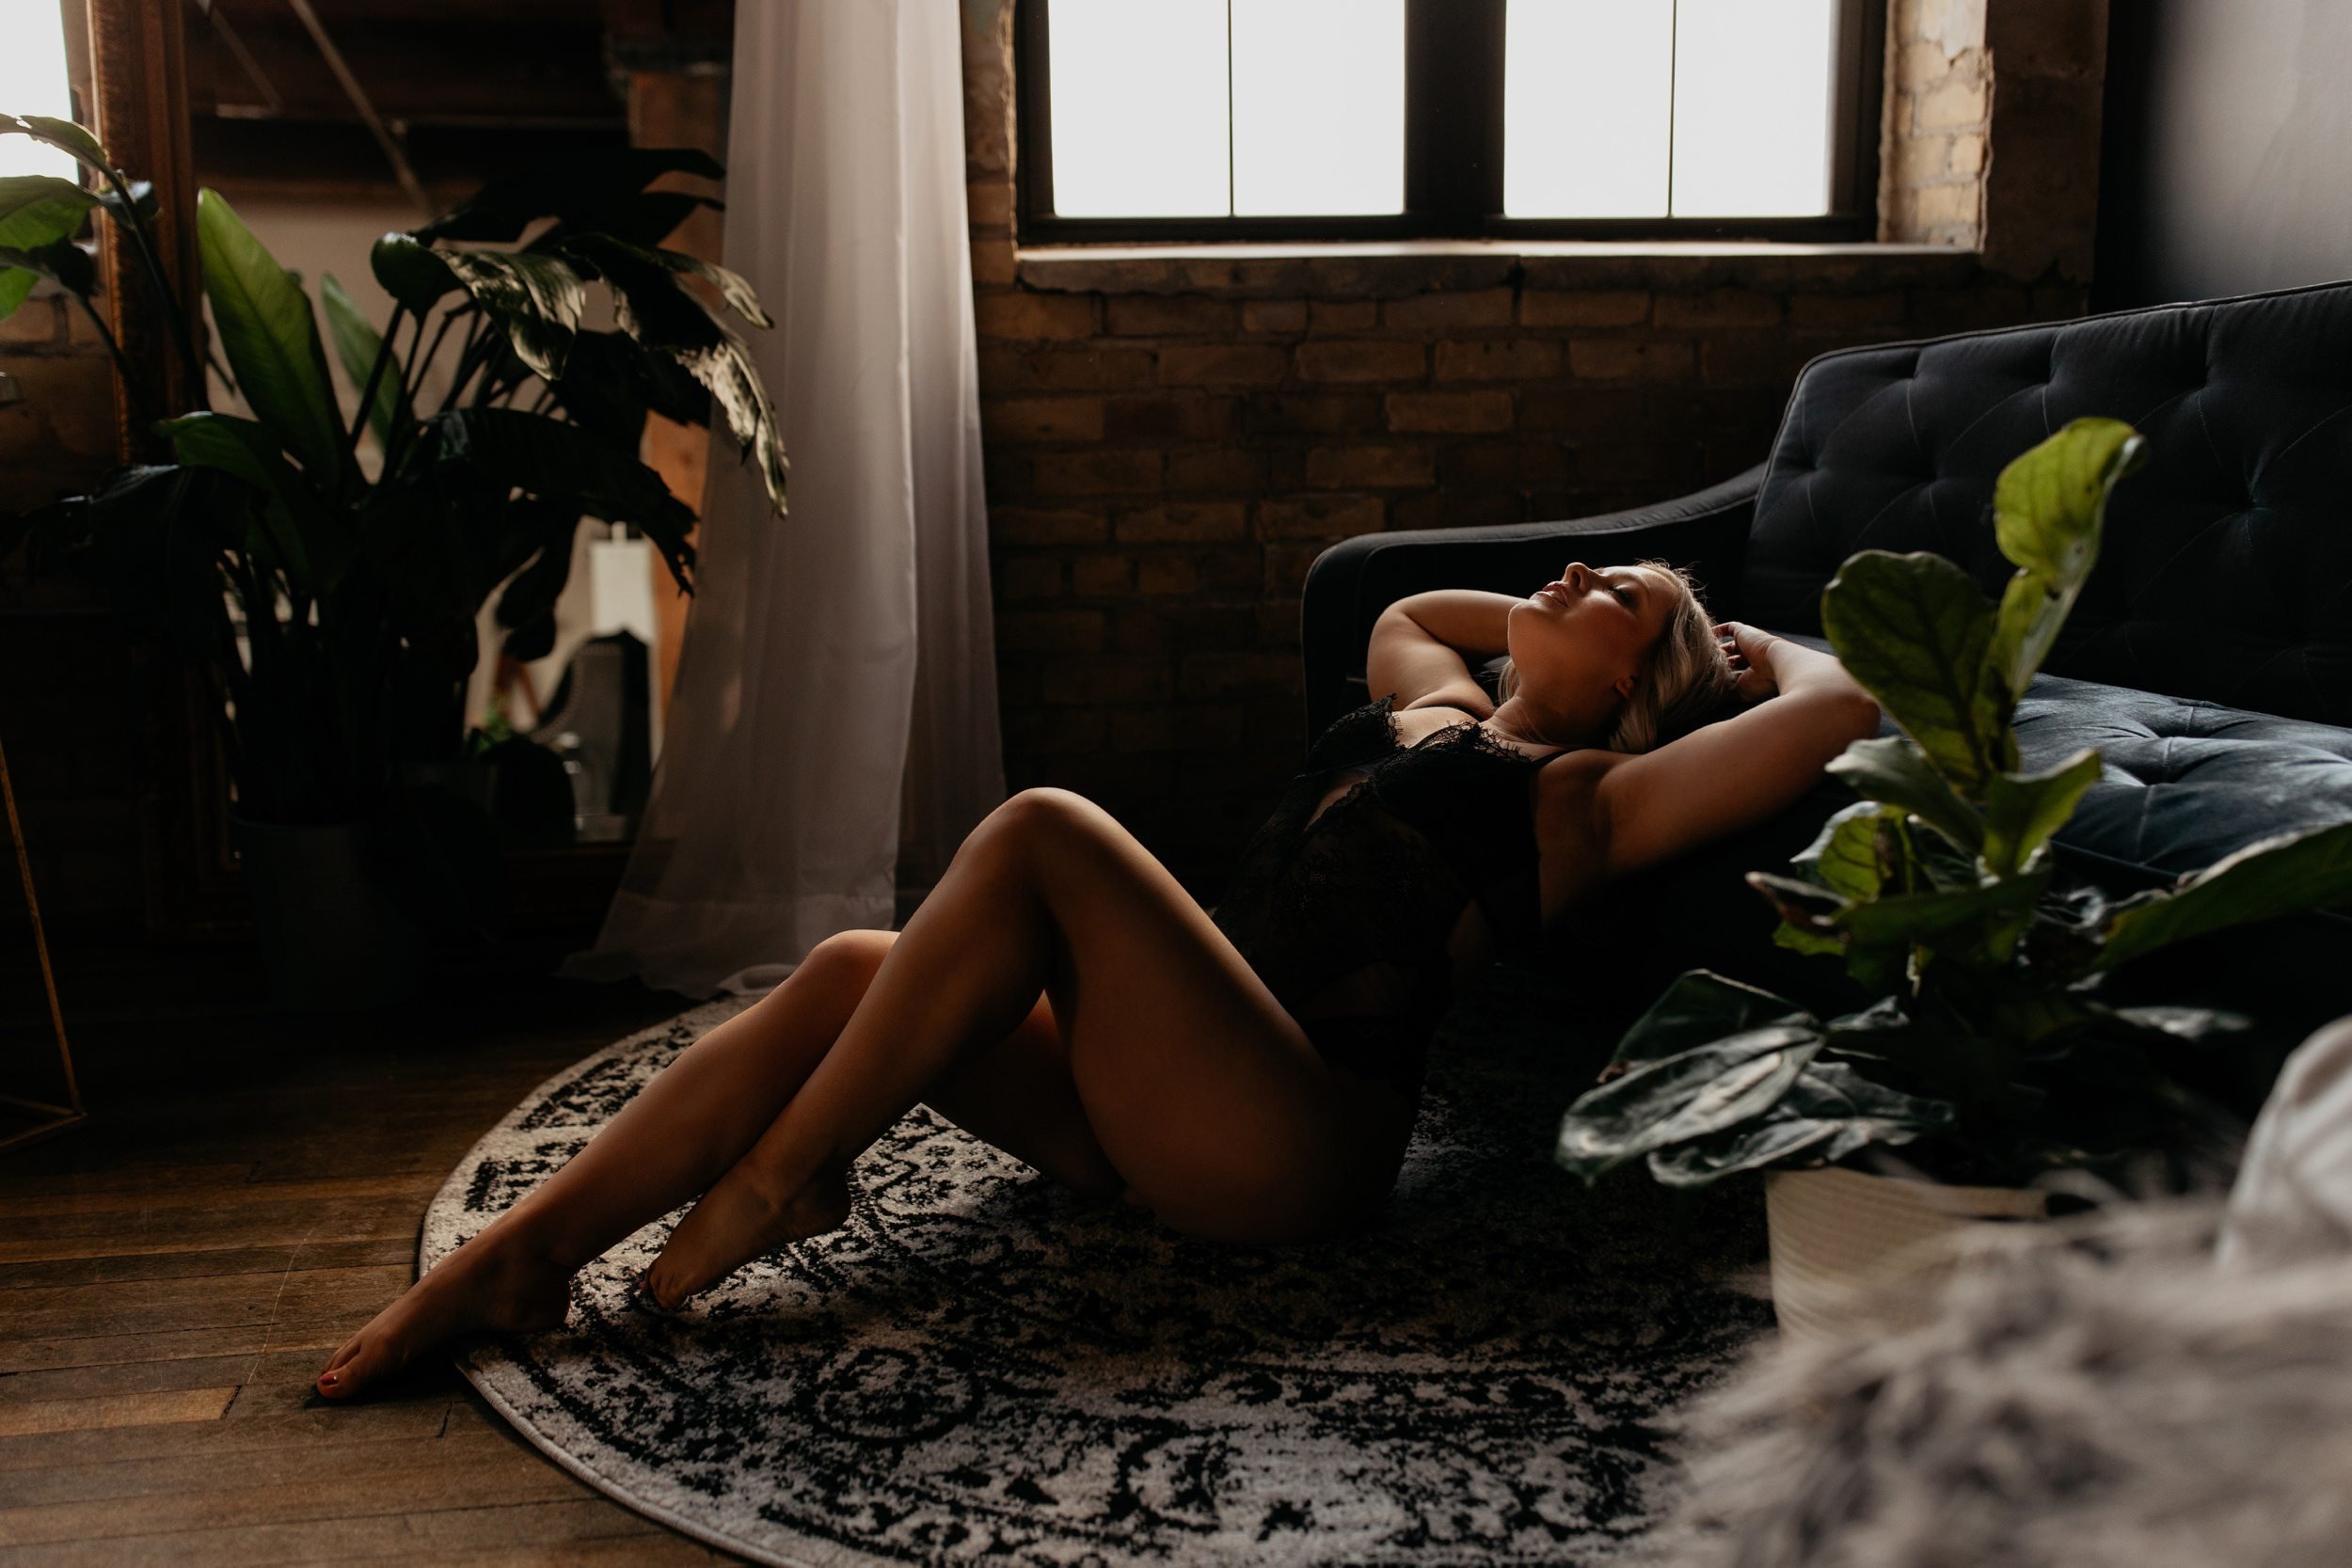 Intimate-Portraits-of-a-Woman-in-a-Loft-Style-Boudoir-Studio-with-Natural-Light-0004.JPG